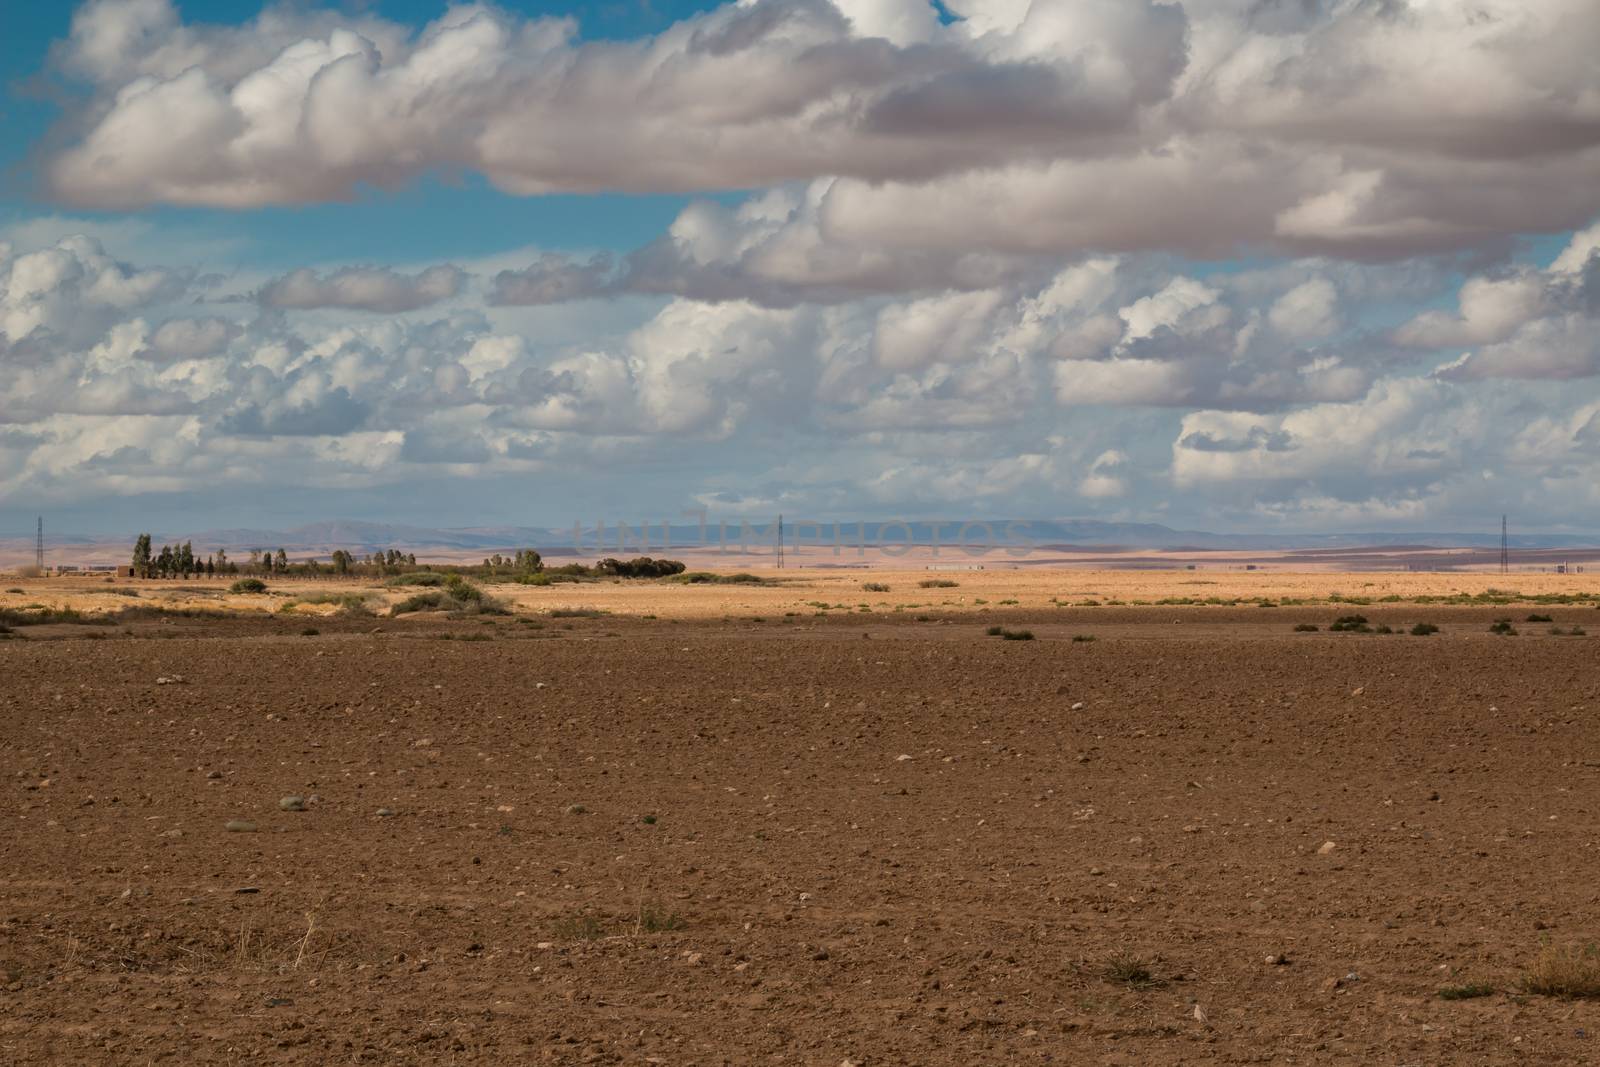 Country in cloudy weather, Morocco by YassminPhoto